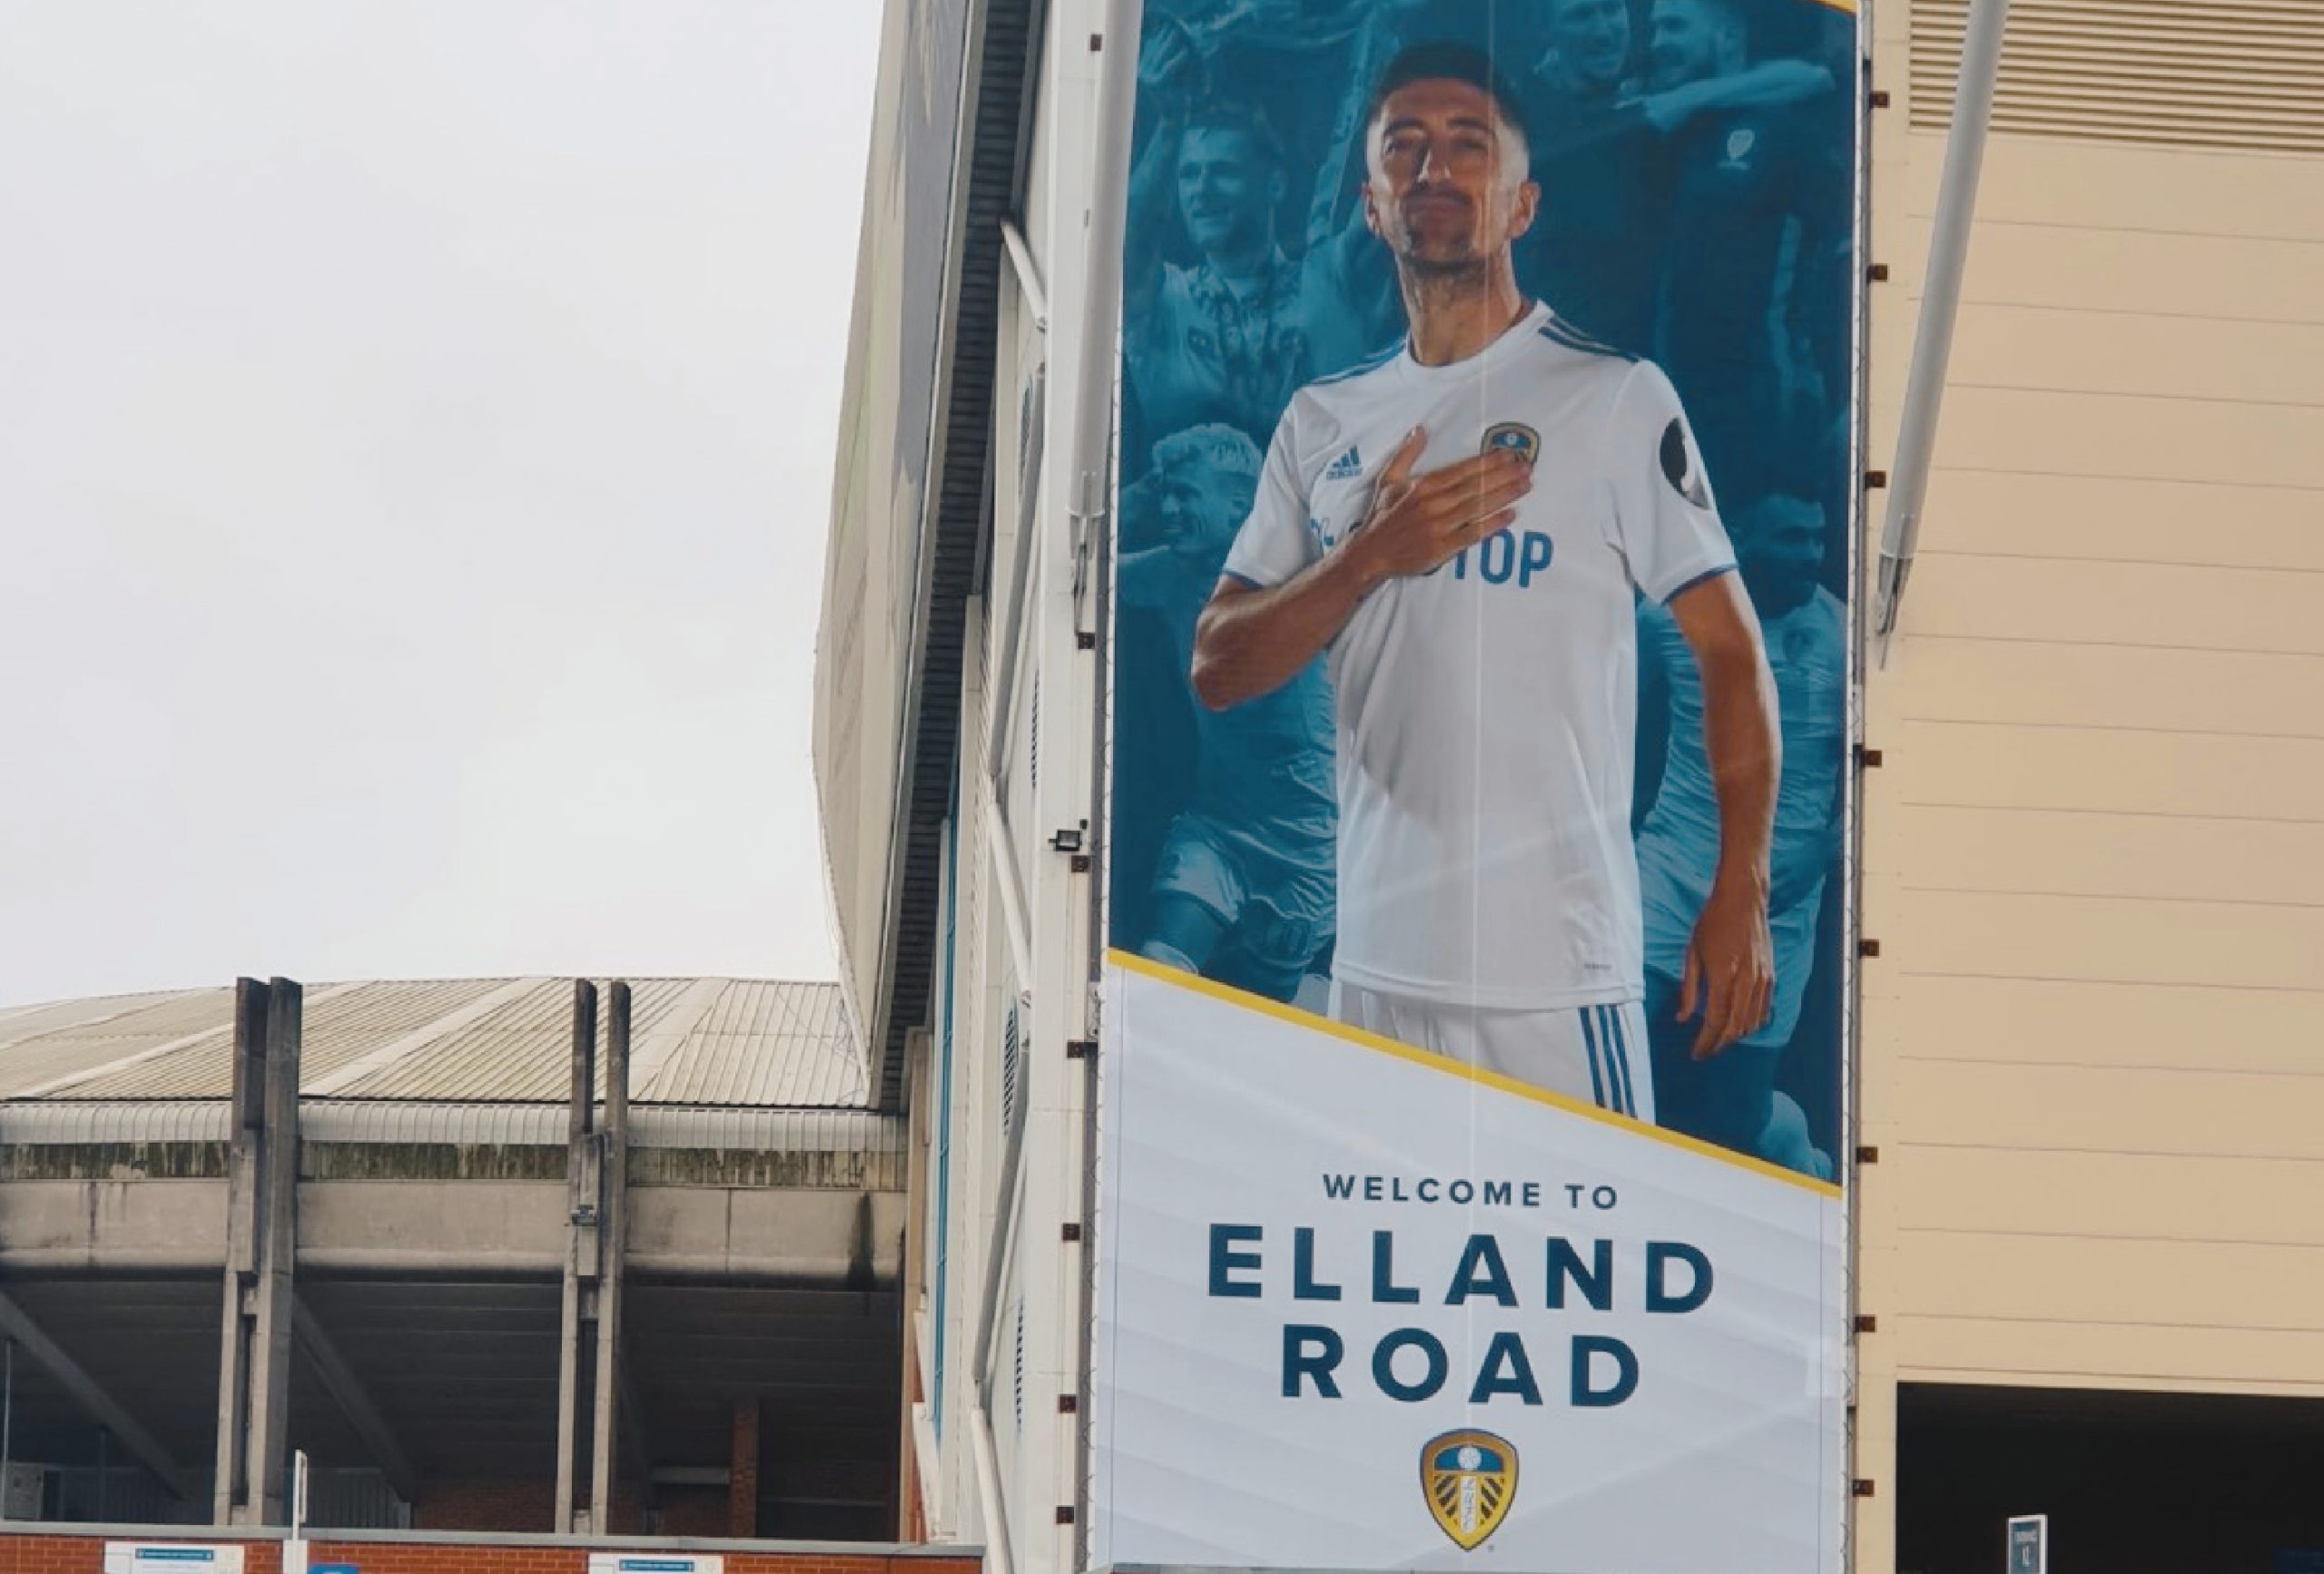 Huge Pablo Hernandez and Liam Cooper banners go up at Elland Road before first PL game in 16 years